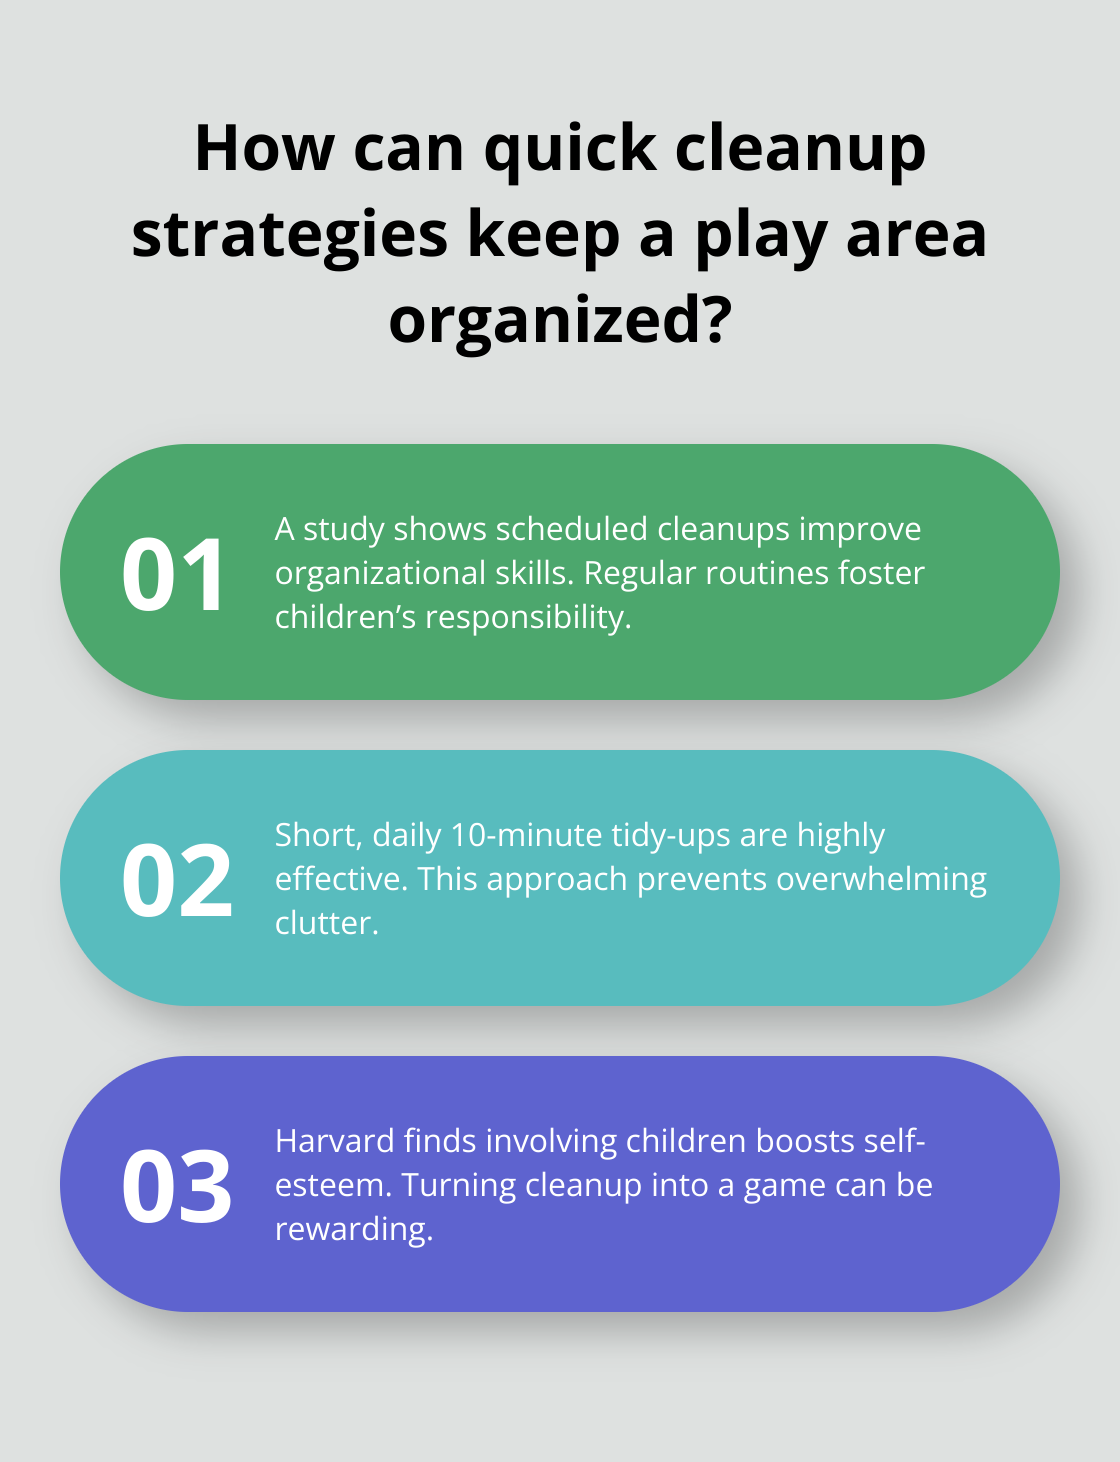 Fact - How can quick cleanup strategies keep a play area organized?